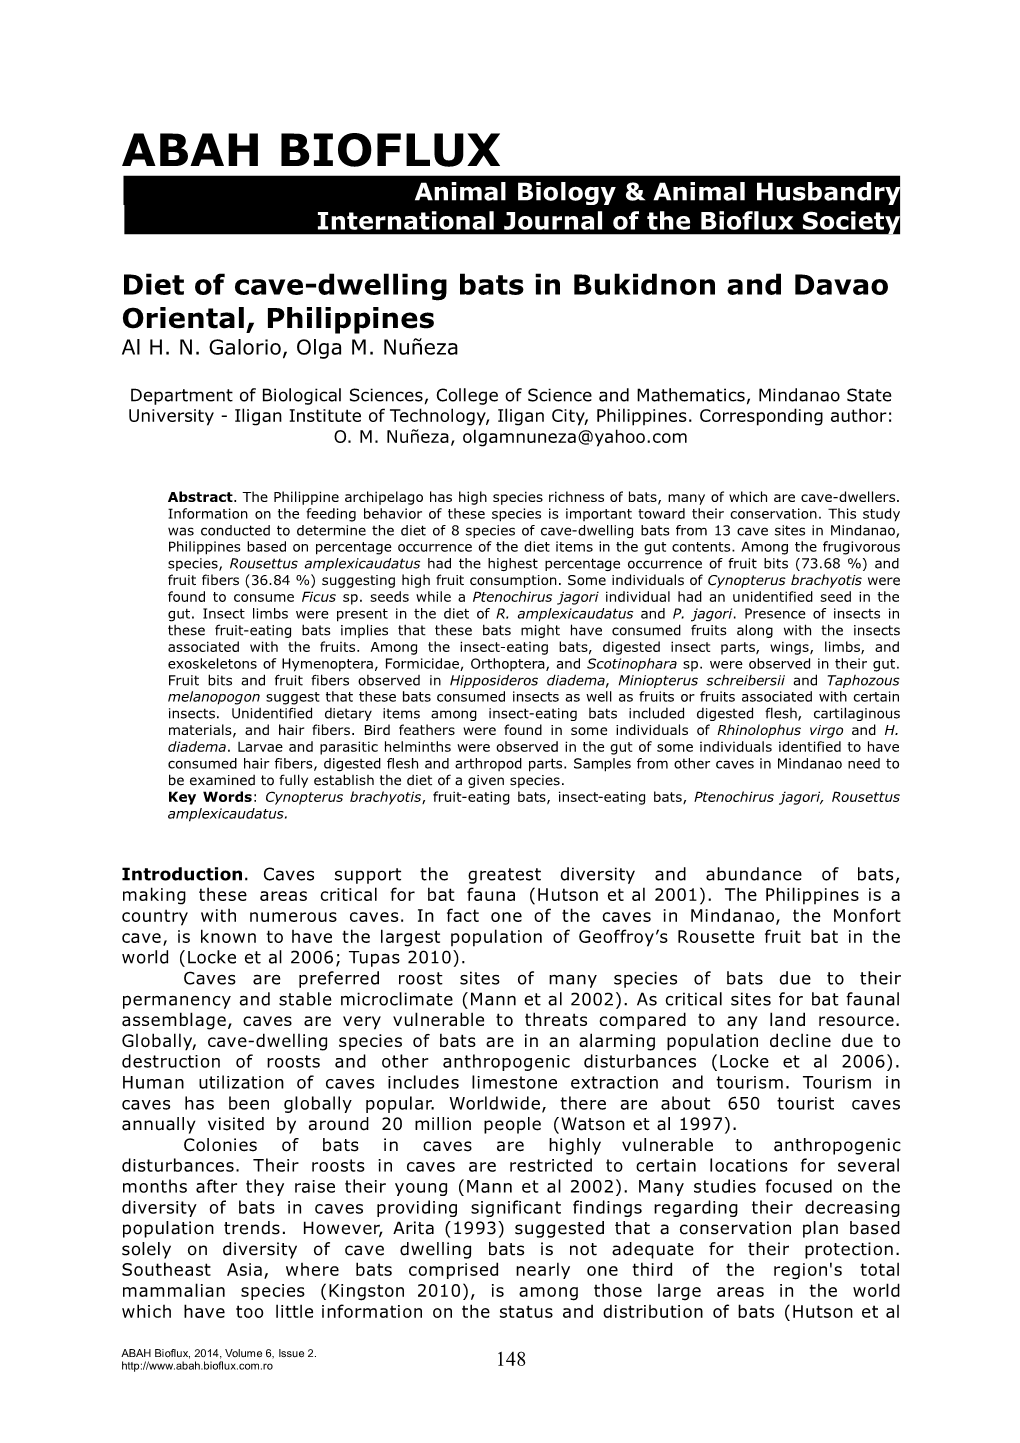 Galorio A. H. N., Nuneza O. M., 2014 Diet of Cave-Dwelling Bats In